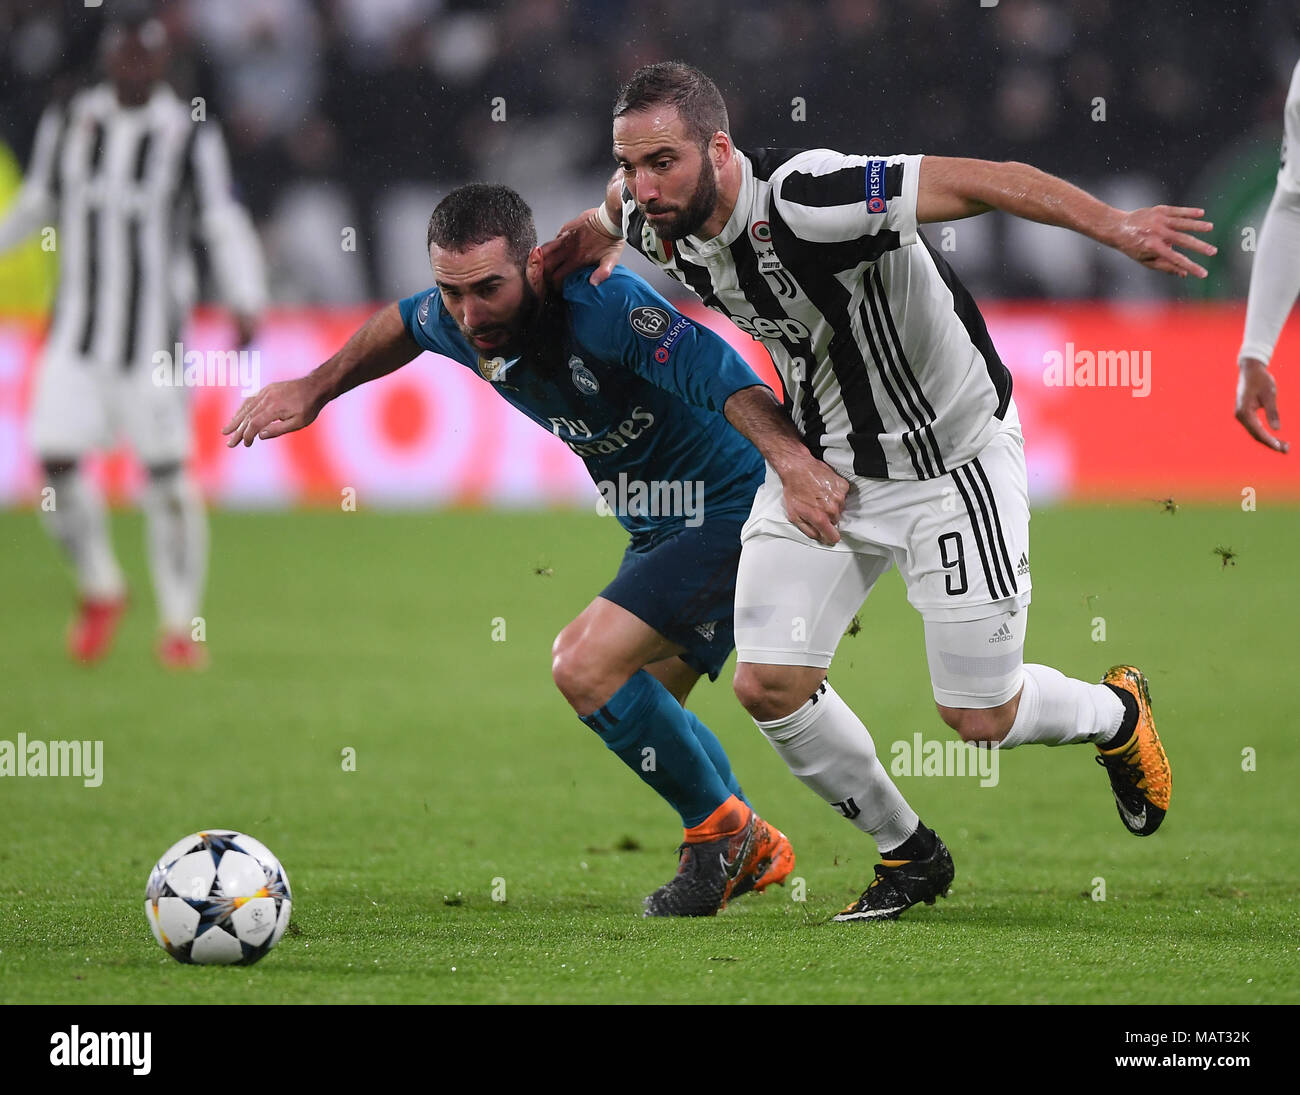 Turin, Italy. 3rd Apr, 2018. Real Madrid's Dani Carvajal (L) vies with Juventus' Gonzalo Higuain during the UEFA Champions League quarterfinal first leg soccer match between Juventus and Real Madrid in Turin, Italy, on April 3, 2018. Real Madrid won 3-0. Credit: Alberto Lingria/Xinhua/Alamy Live News Stock Photo